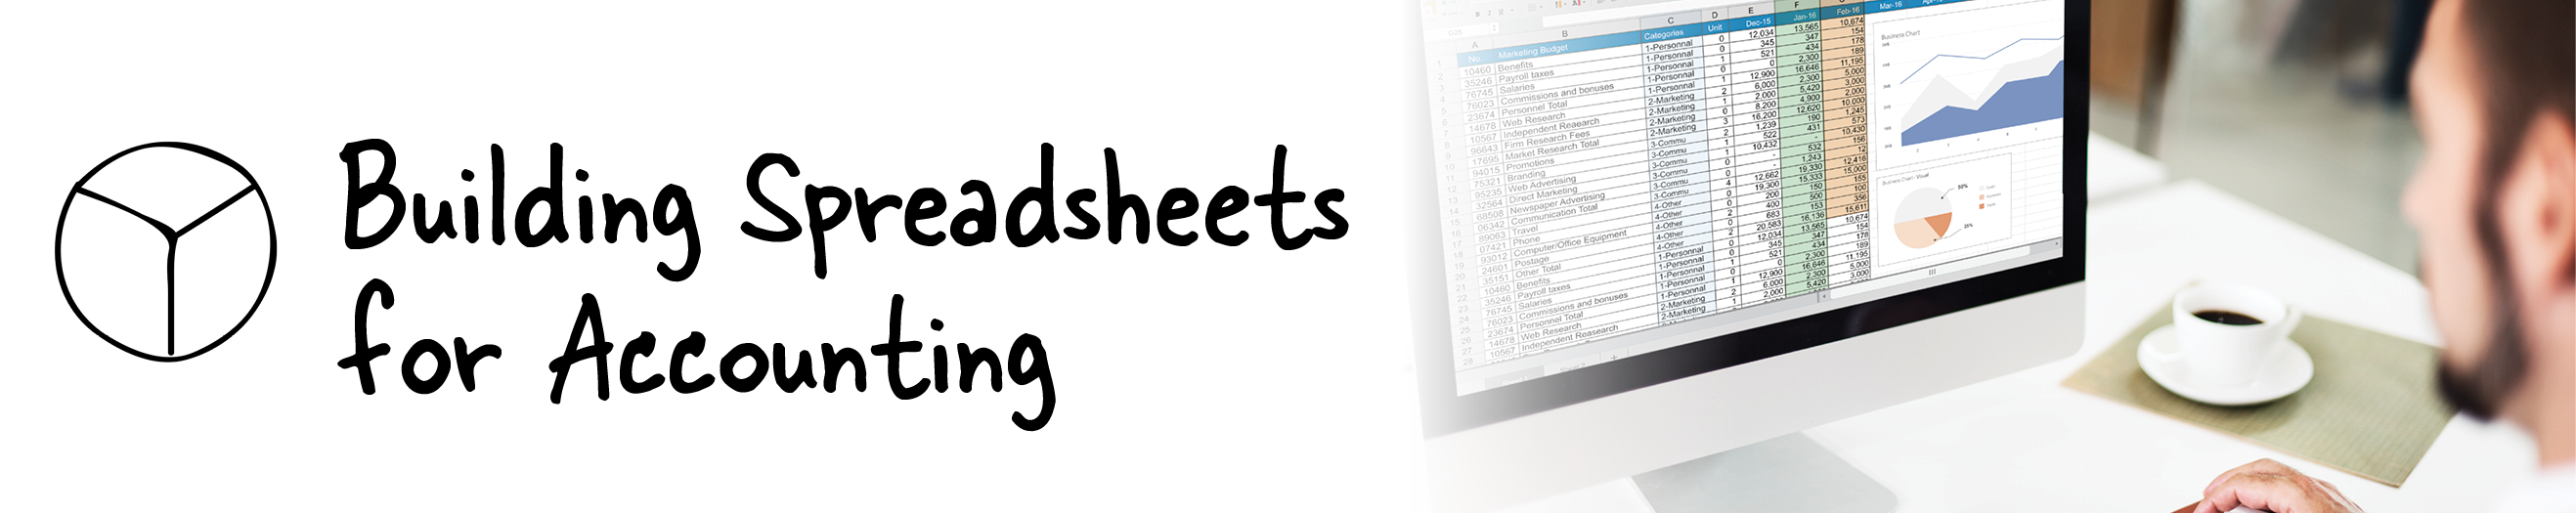 Building Spreadsheets for Accounting